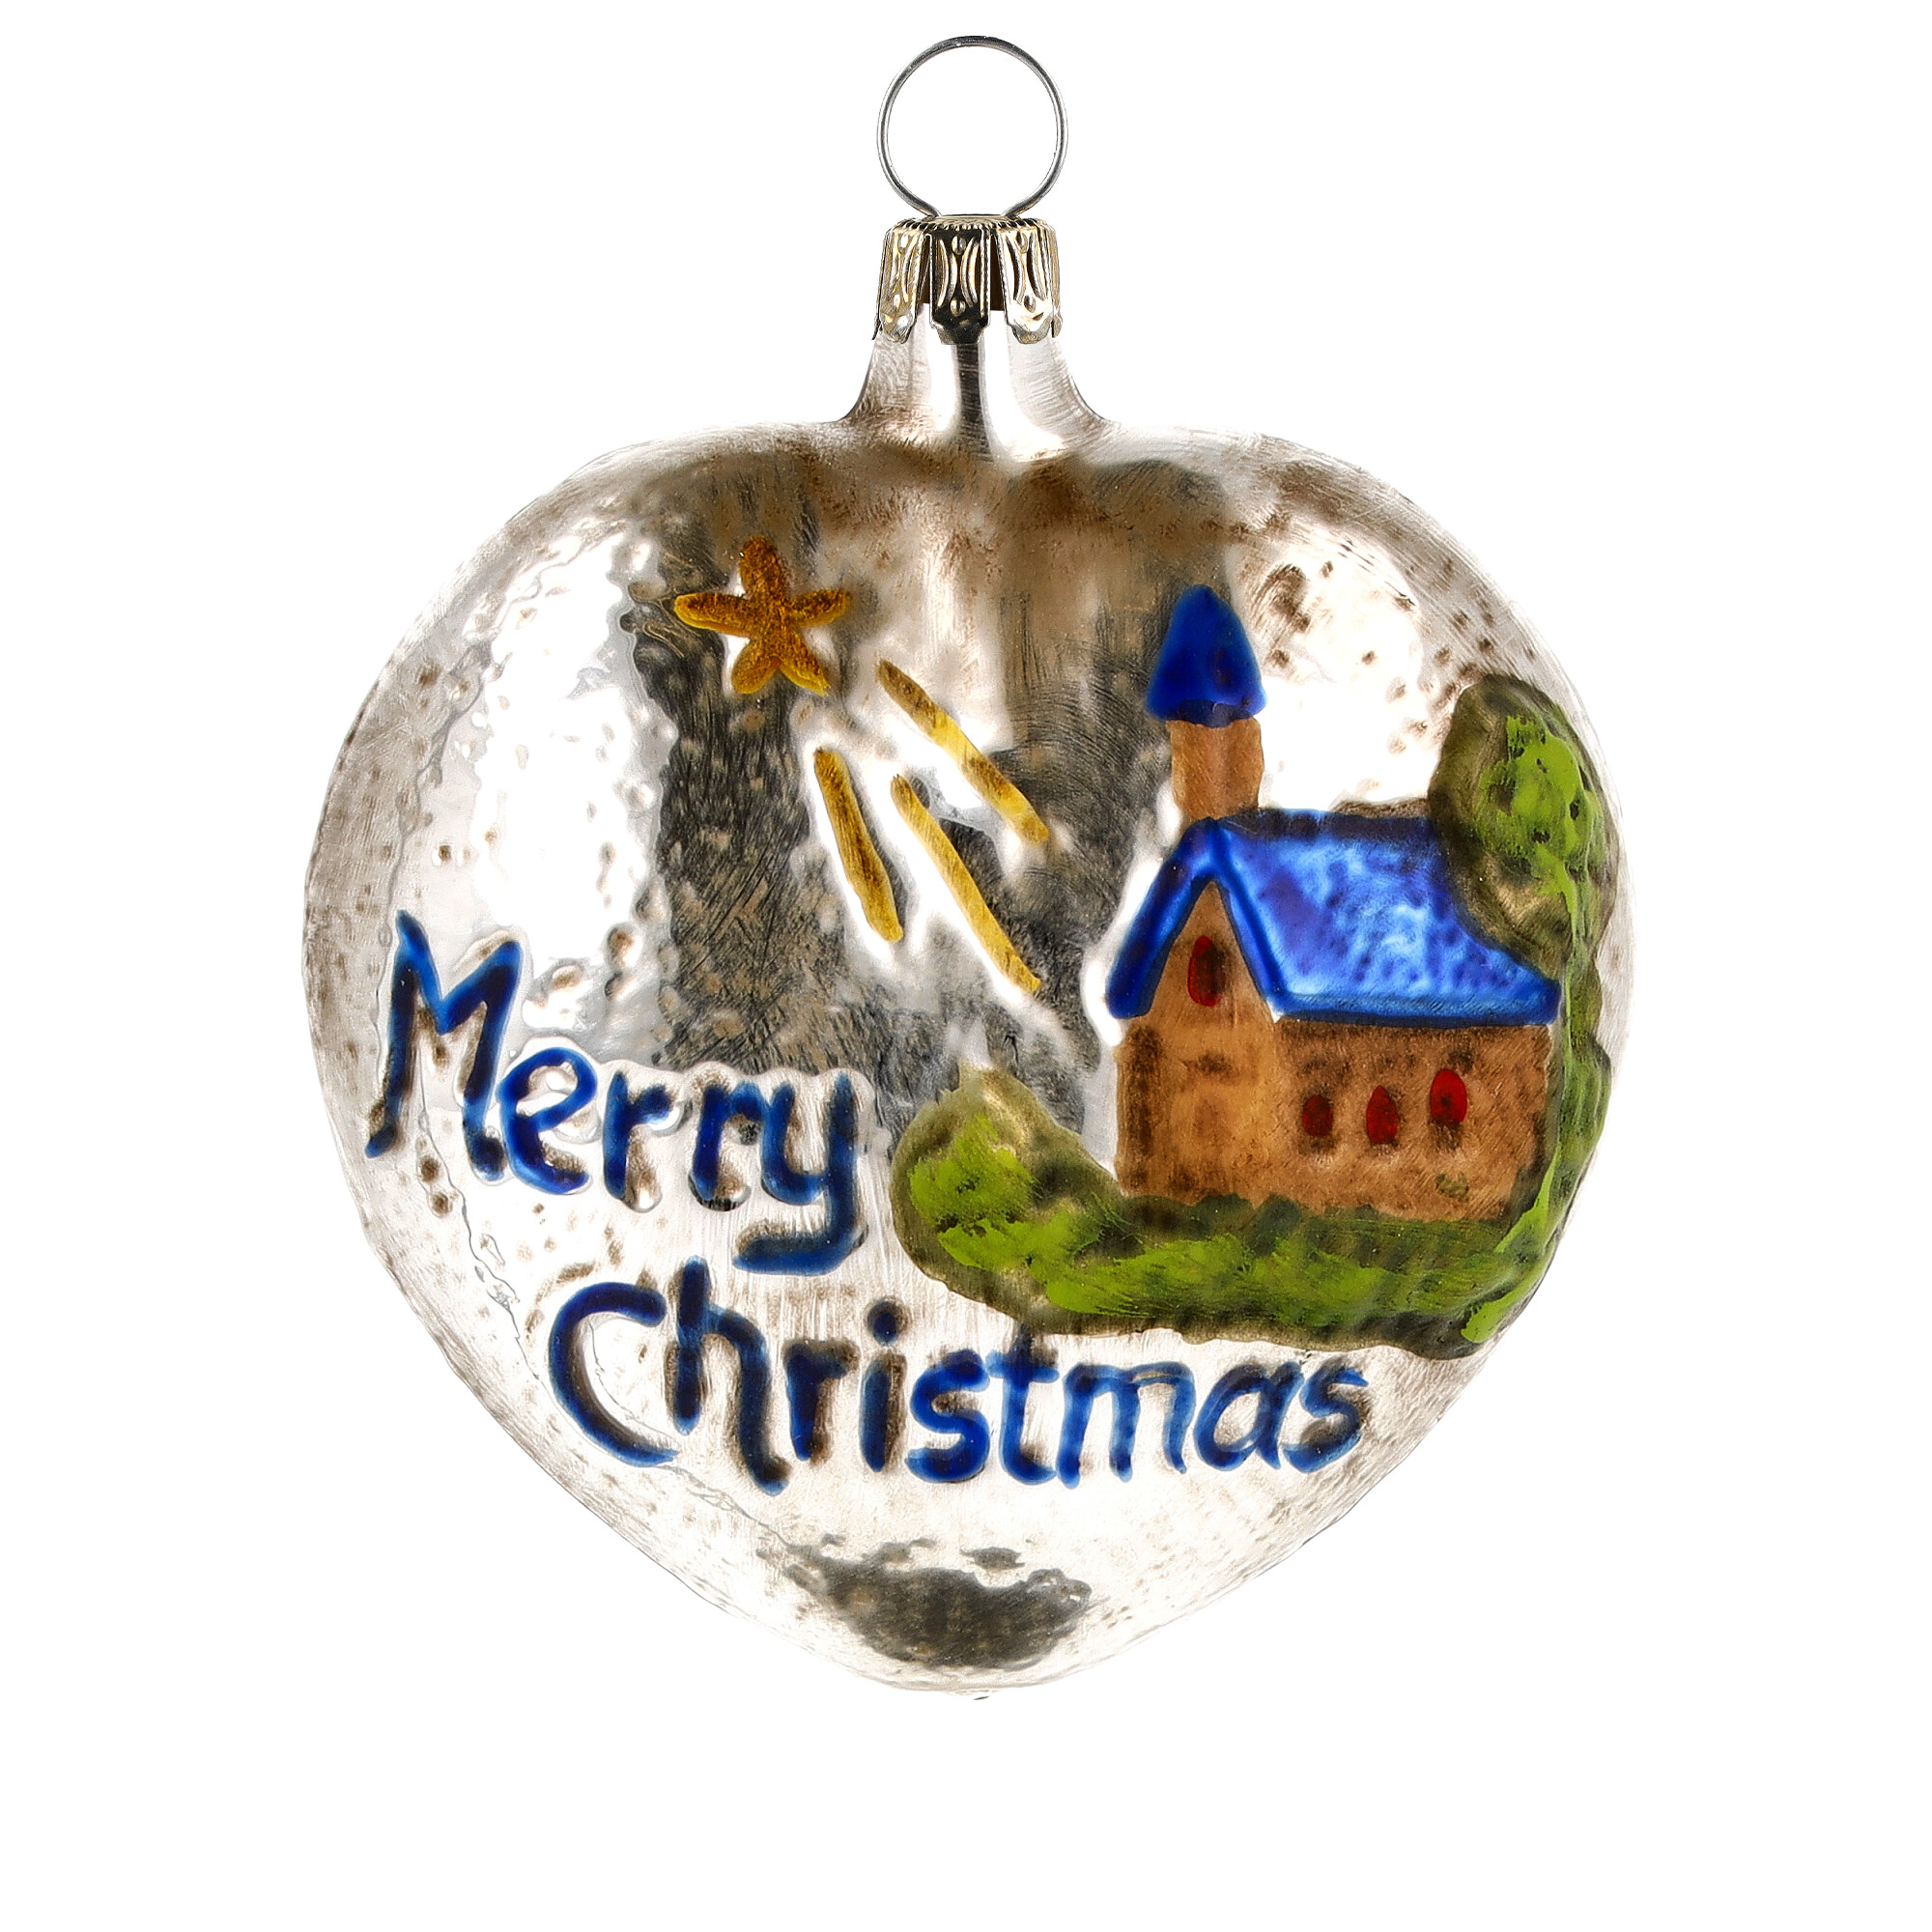 Retro Vintage style Christmas Glass Ornament - Heart with church and stars blue roof